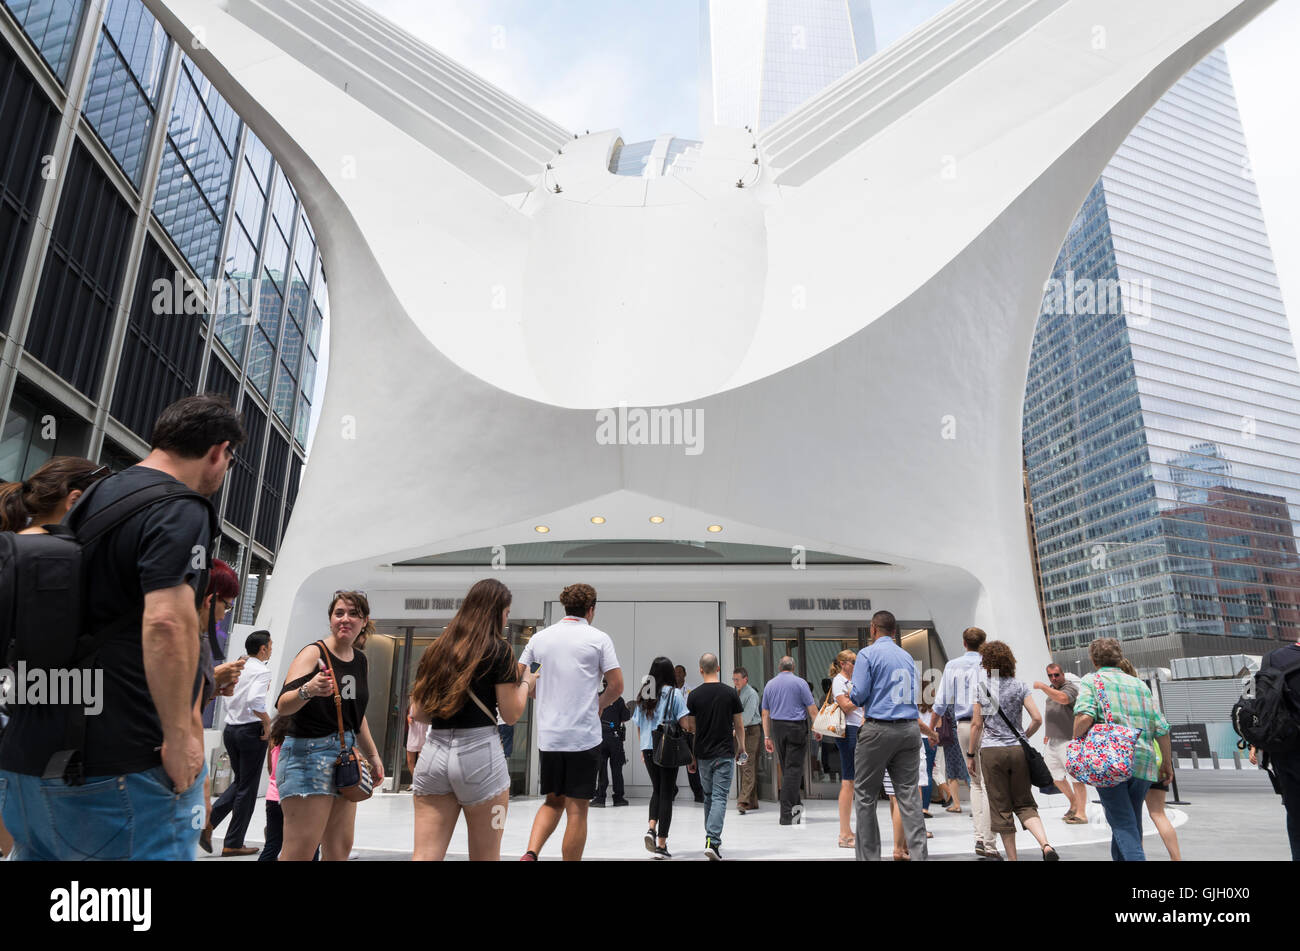 New York, USA. 16th Aug, 2016. New entrance directly into the Oculus from Church Street was also opened for the first time. Thousands of people attended the grand opening of the Westfield shopping mall in the newly built Oculus of the World Trade Center in New York. Credit:  Elizabeth Wake/Alamy Live News. Stock Photo